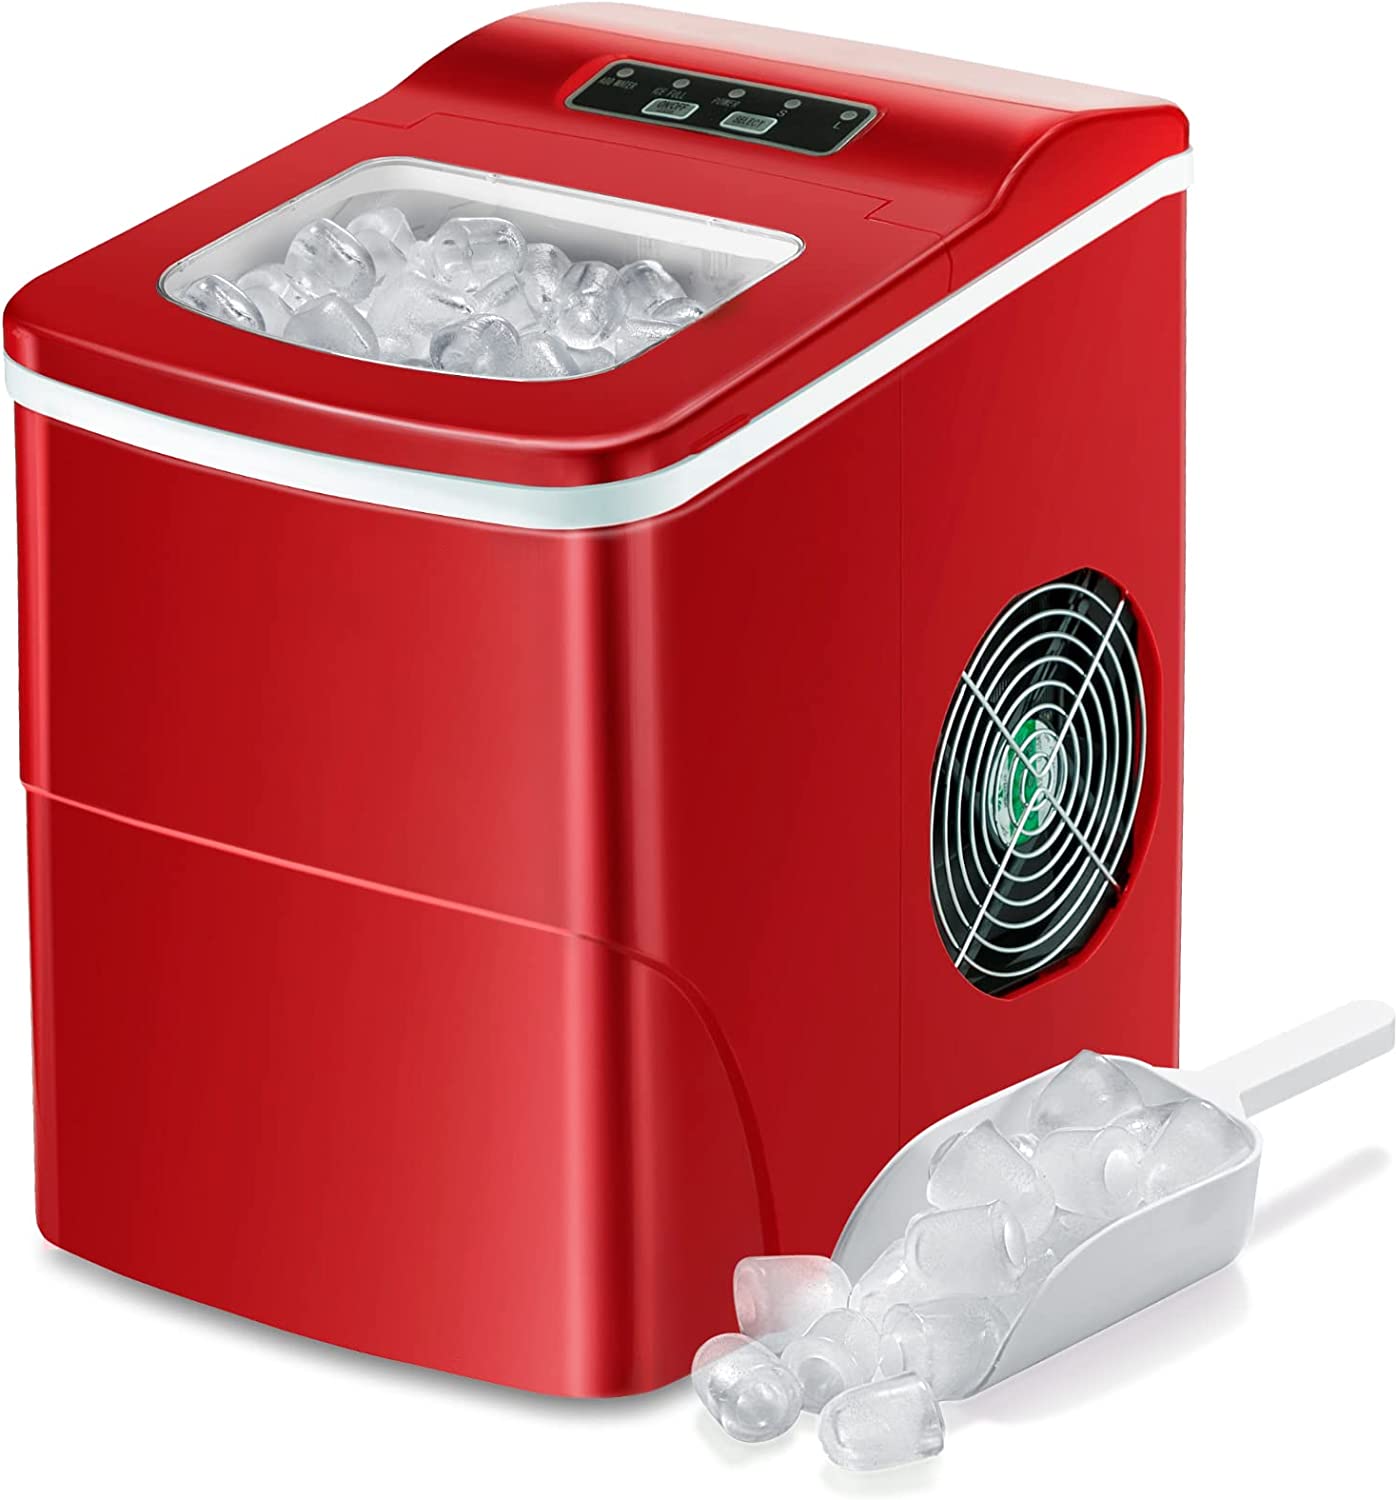 AGLUCKY Counter top Ice Maker Machine,Compact Automatic Ice Maker,9 Cubes  Ready in 6-8 Minutes,Portable Ice Cube Maker with Scoop and Basket,Perfect  for Home/Kitchen/Office/Bar (Red)